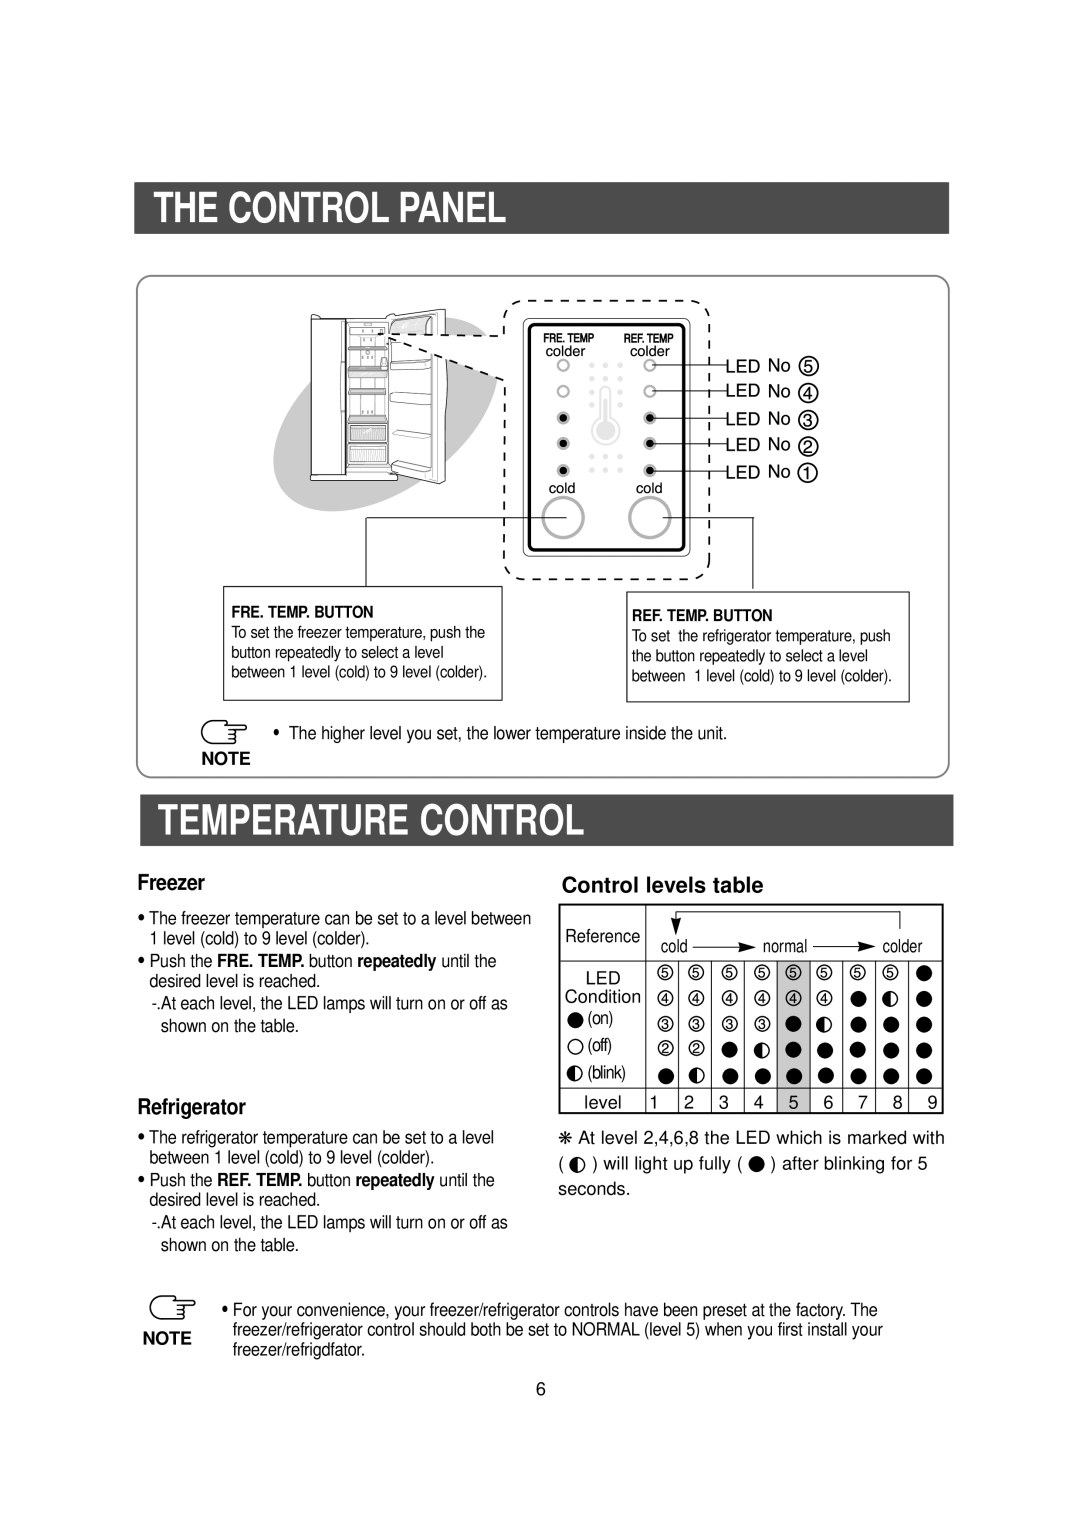 Samsung RS owner manual Temperature Control, Freezer, Refrigerator, Control levels table, The Control Panel 